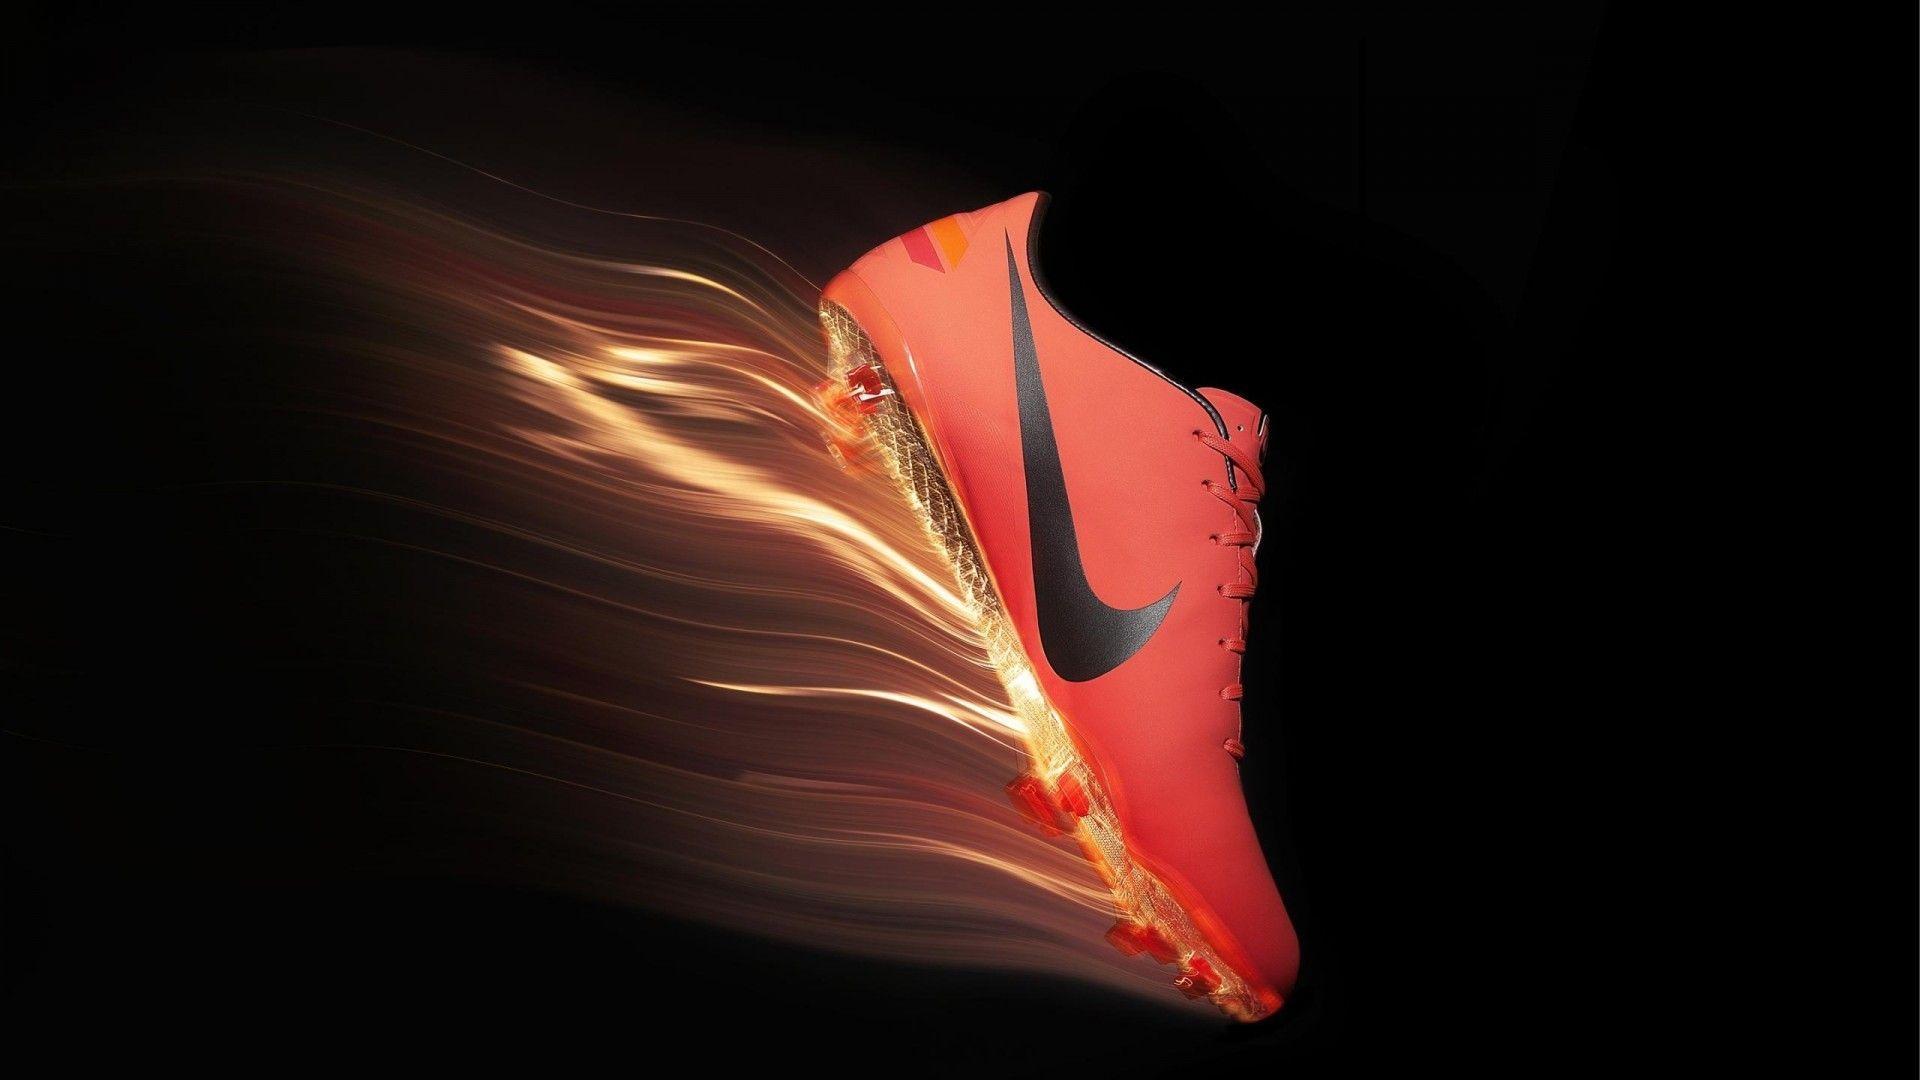 New Nike Mercurial Shoes 2014 PC Free Download